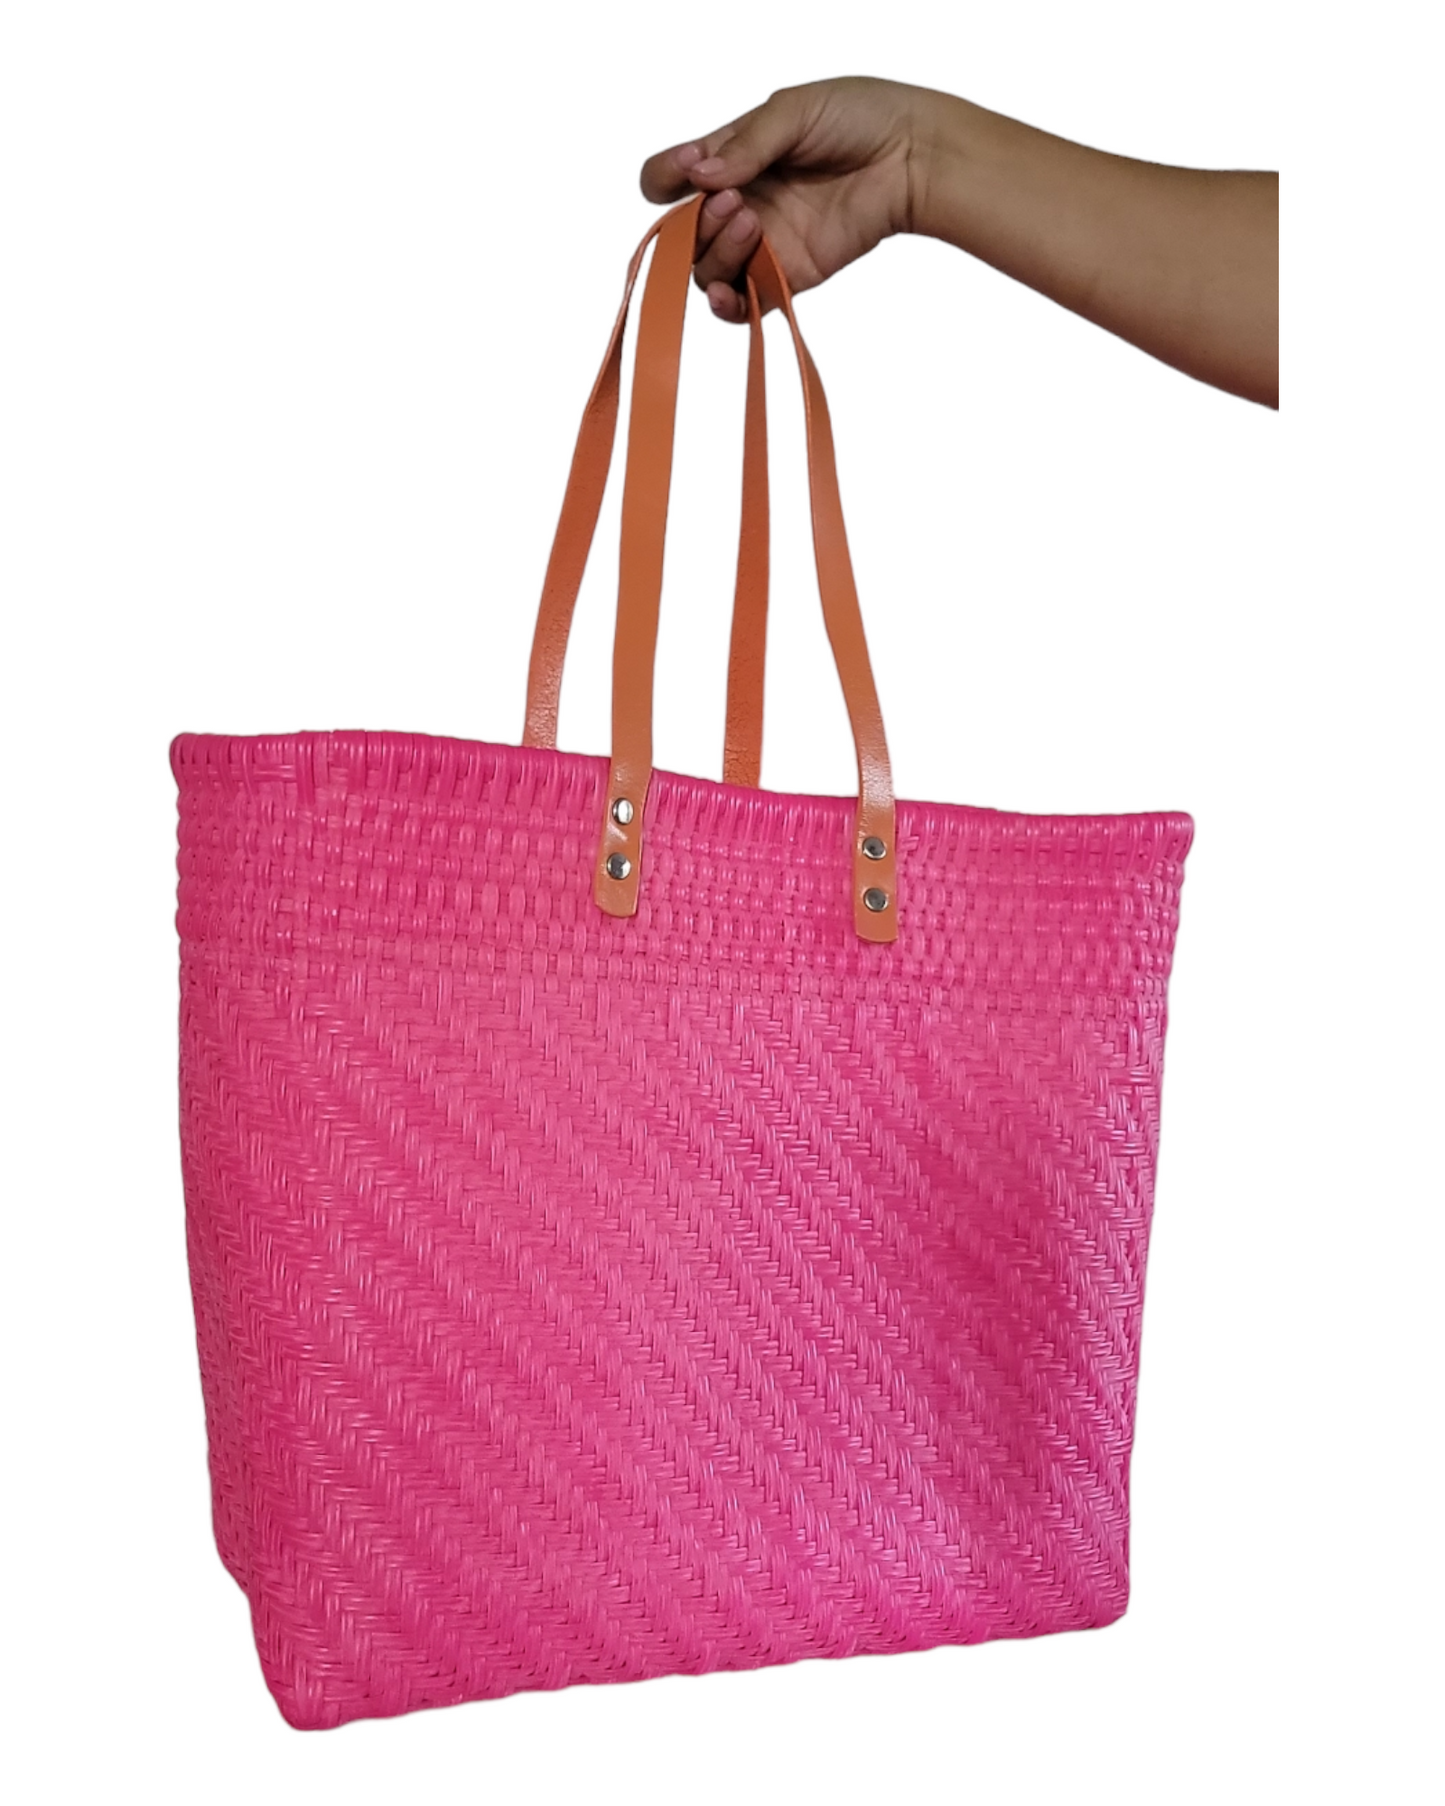 Large Tote | Jade Collection. Handwoven Bag